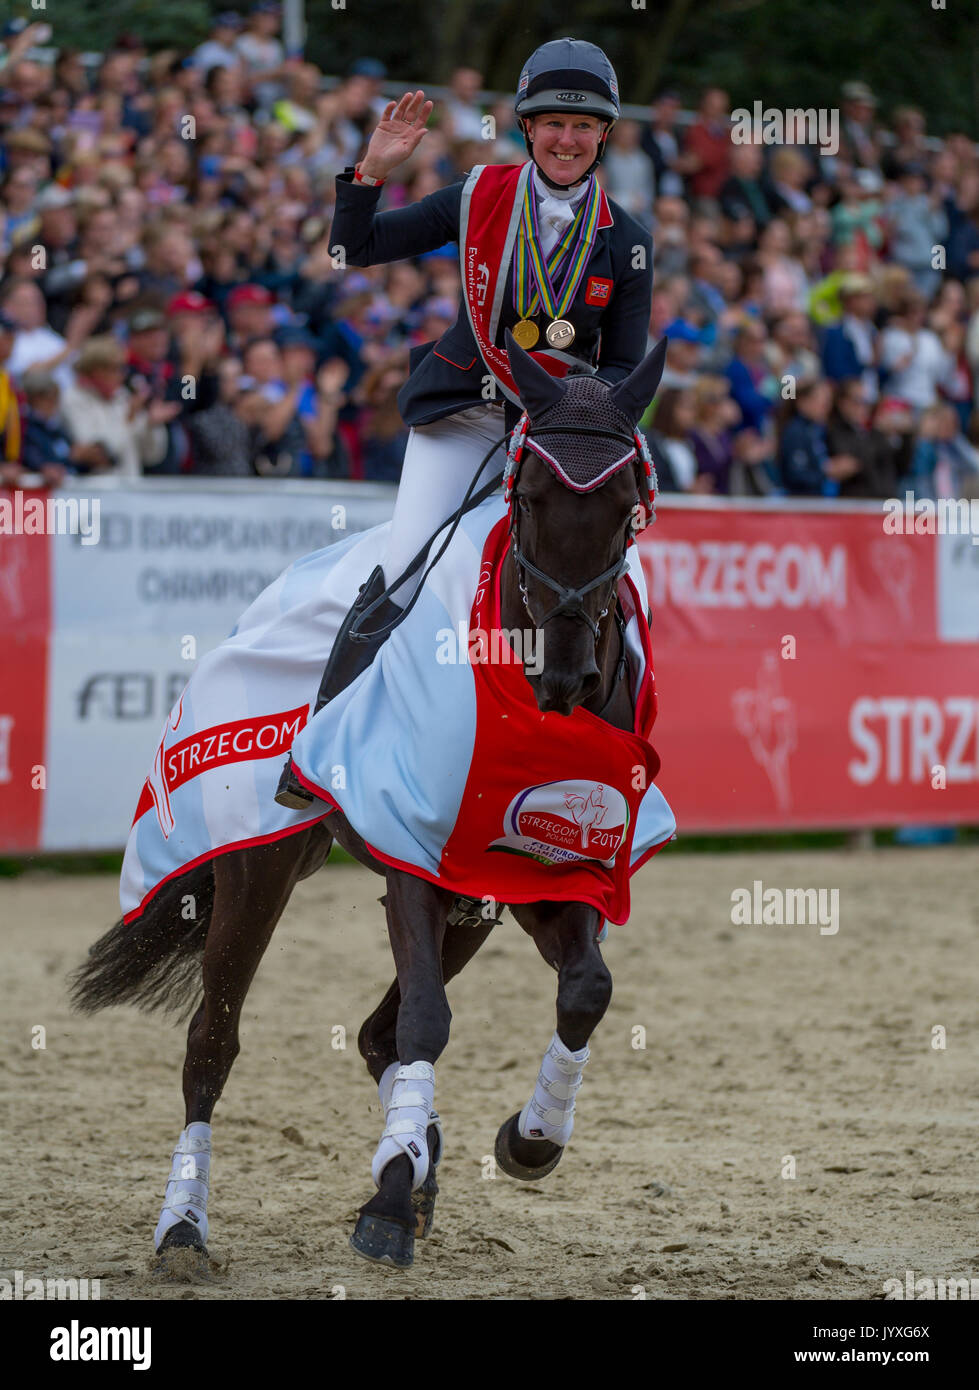 FEI EUROPEAN EVENTING CHAMPIONSHIPS, STRZEGOM, LOWER SILESIA , POLAND, 20TH AUGUST 2017. NICOLA WILSON SHOWN HERE ON HER LAP OF HONOUR WINS AN INDIVIDUAL BRONZE MEDAL AND A TEAM GOLD MEDAL . ©TREVOR HOLT / ALAMY LIVE NEWS.  ALAMY LIVE NEWS. Stock Photo